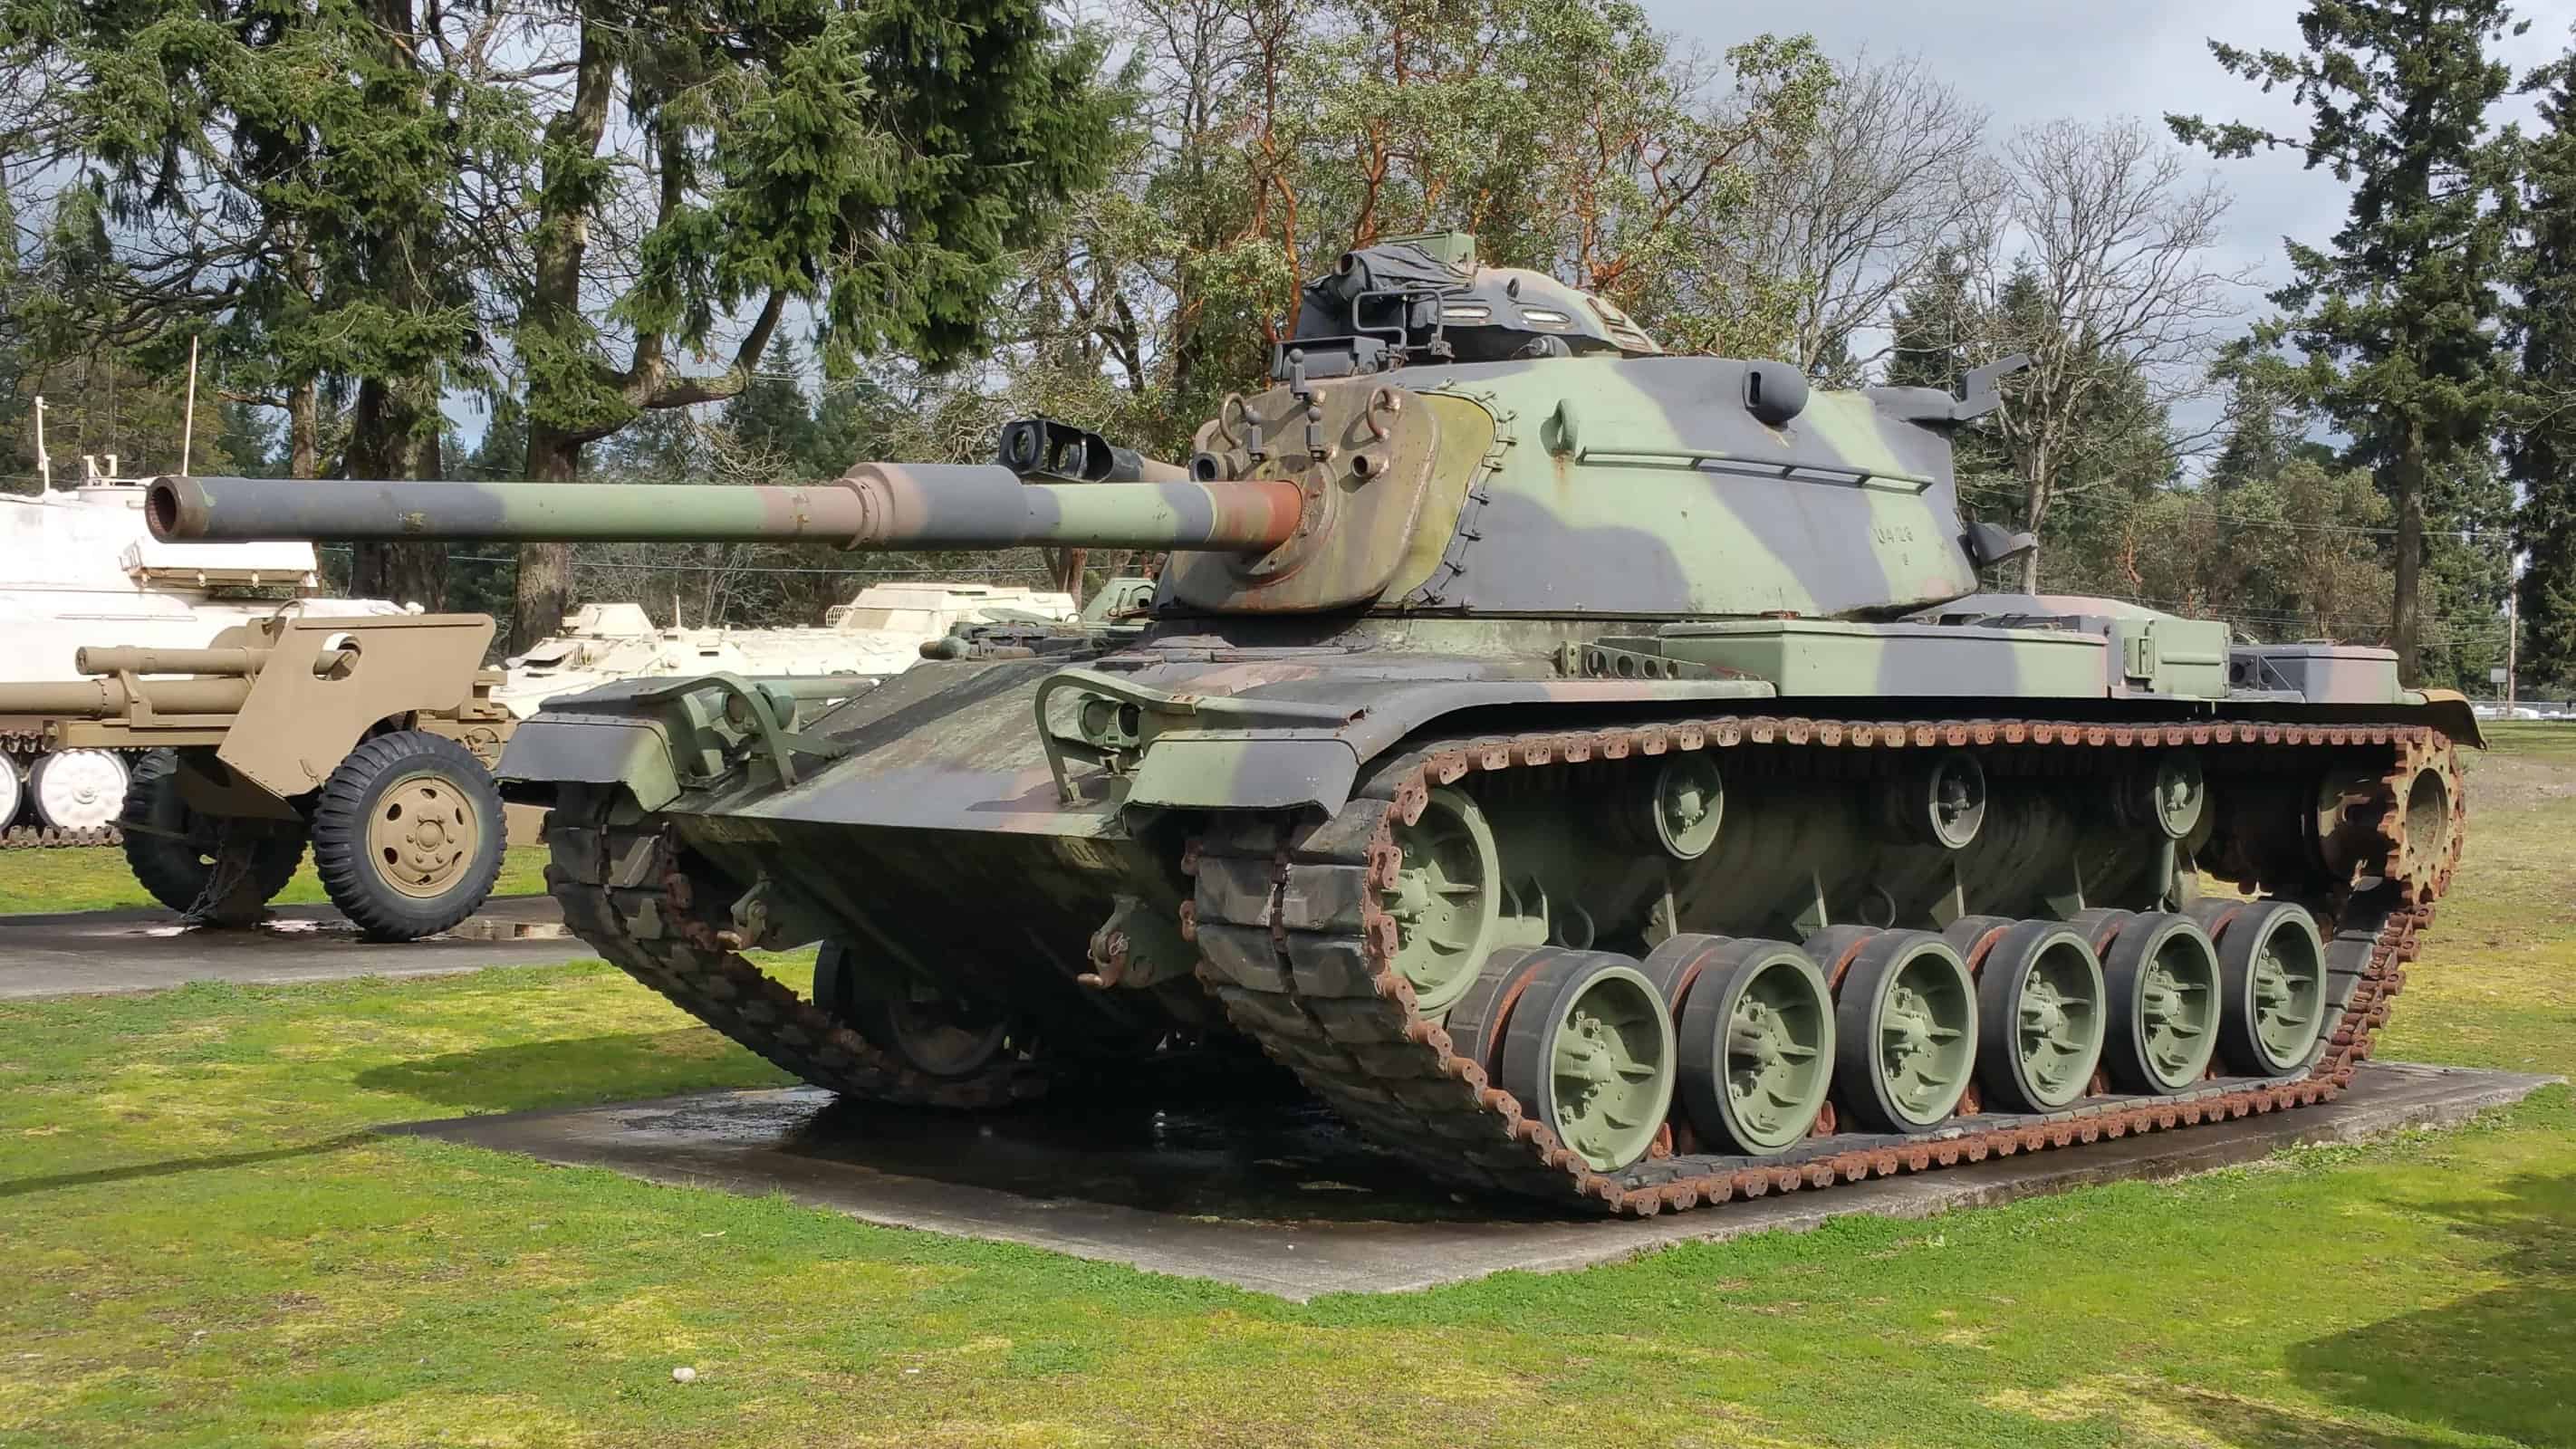 File:M60 Patton Tank Fort Lewis Military Museum.jpg by Articseahorse